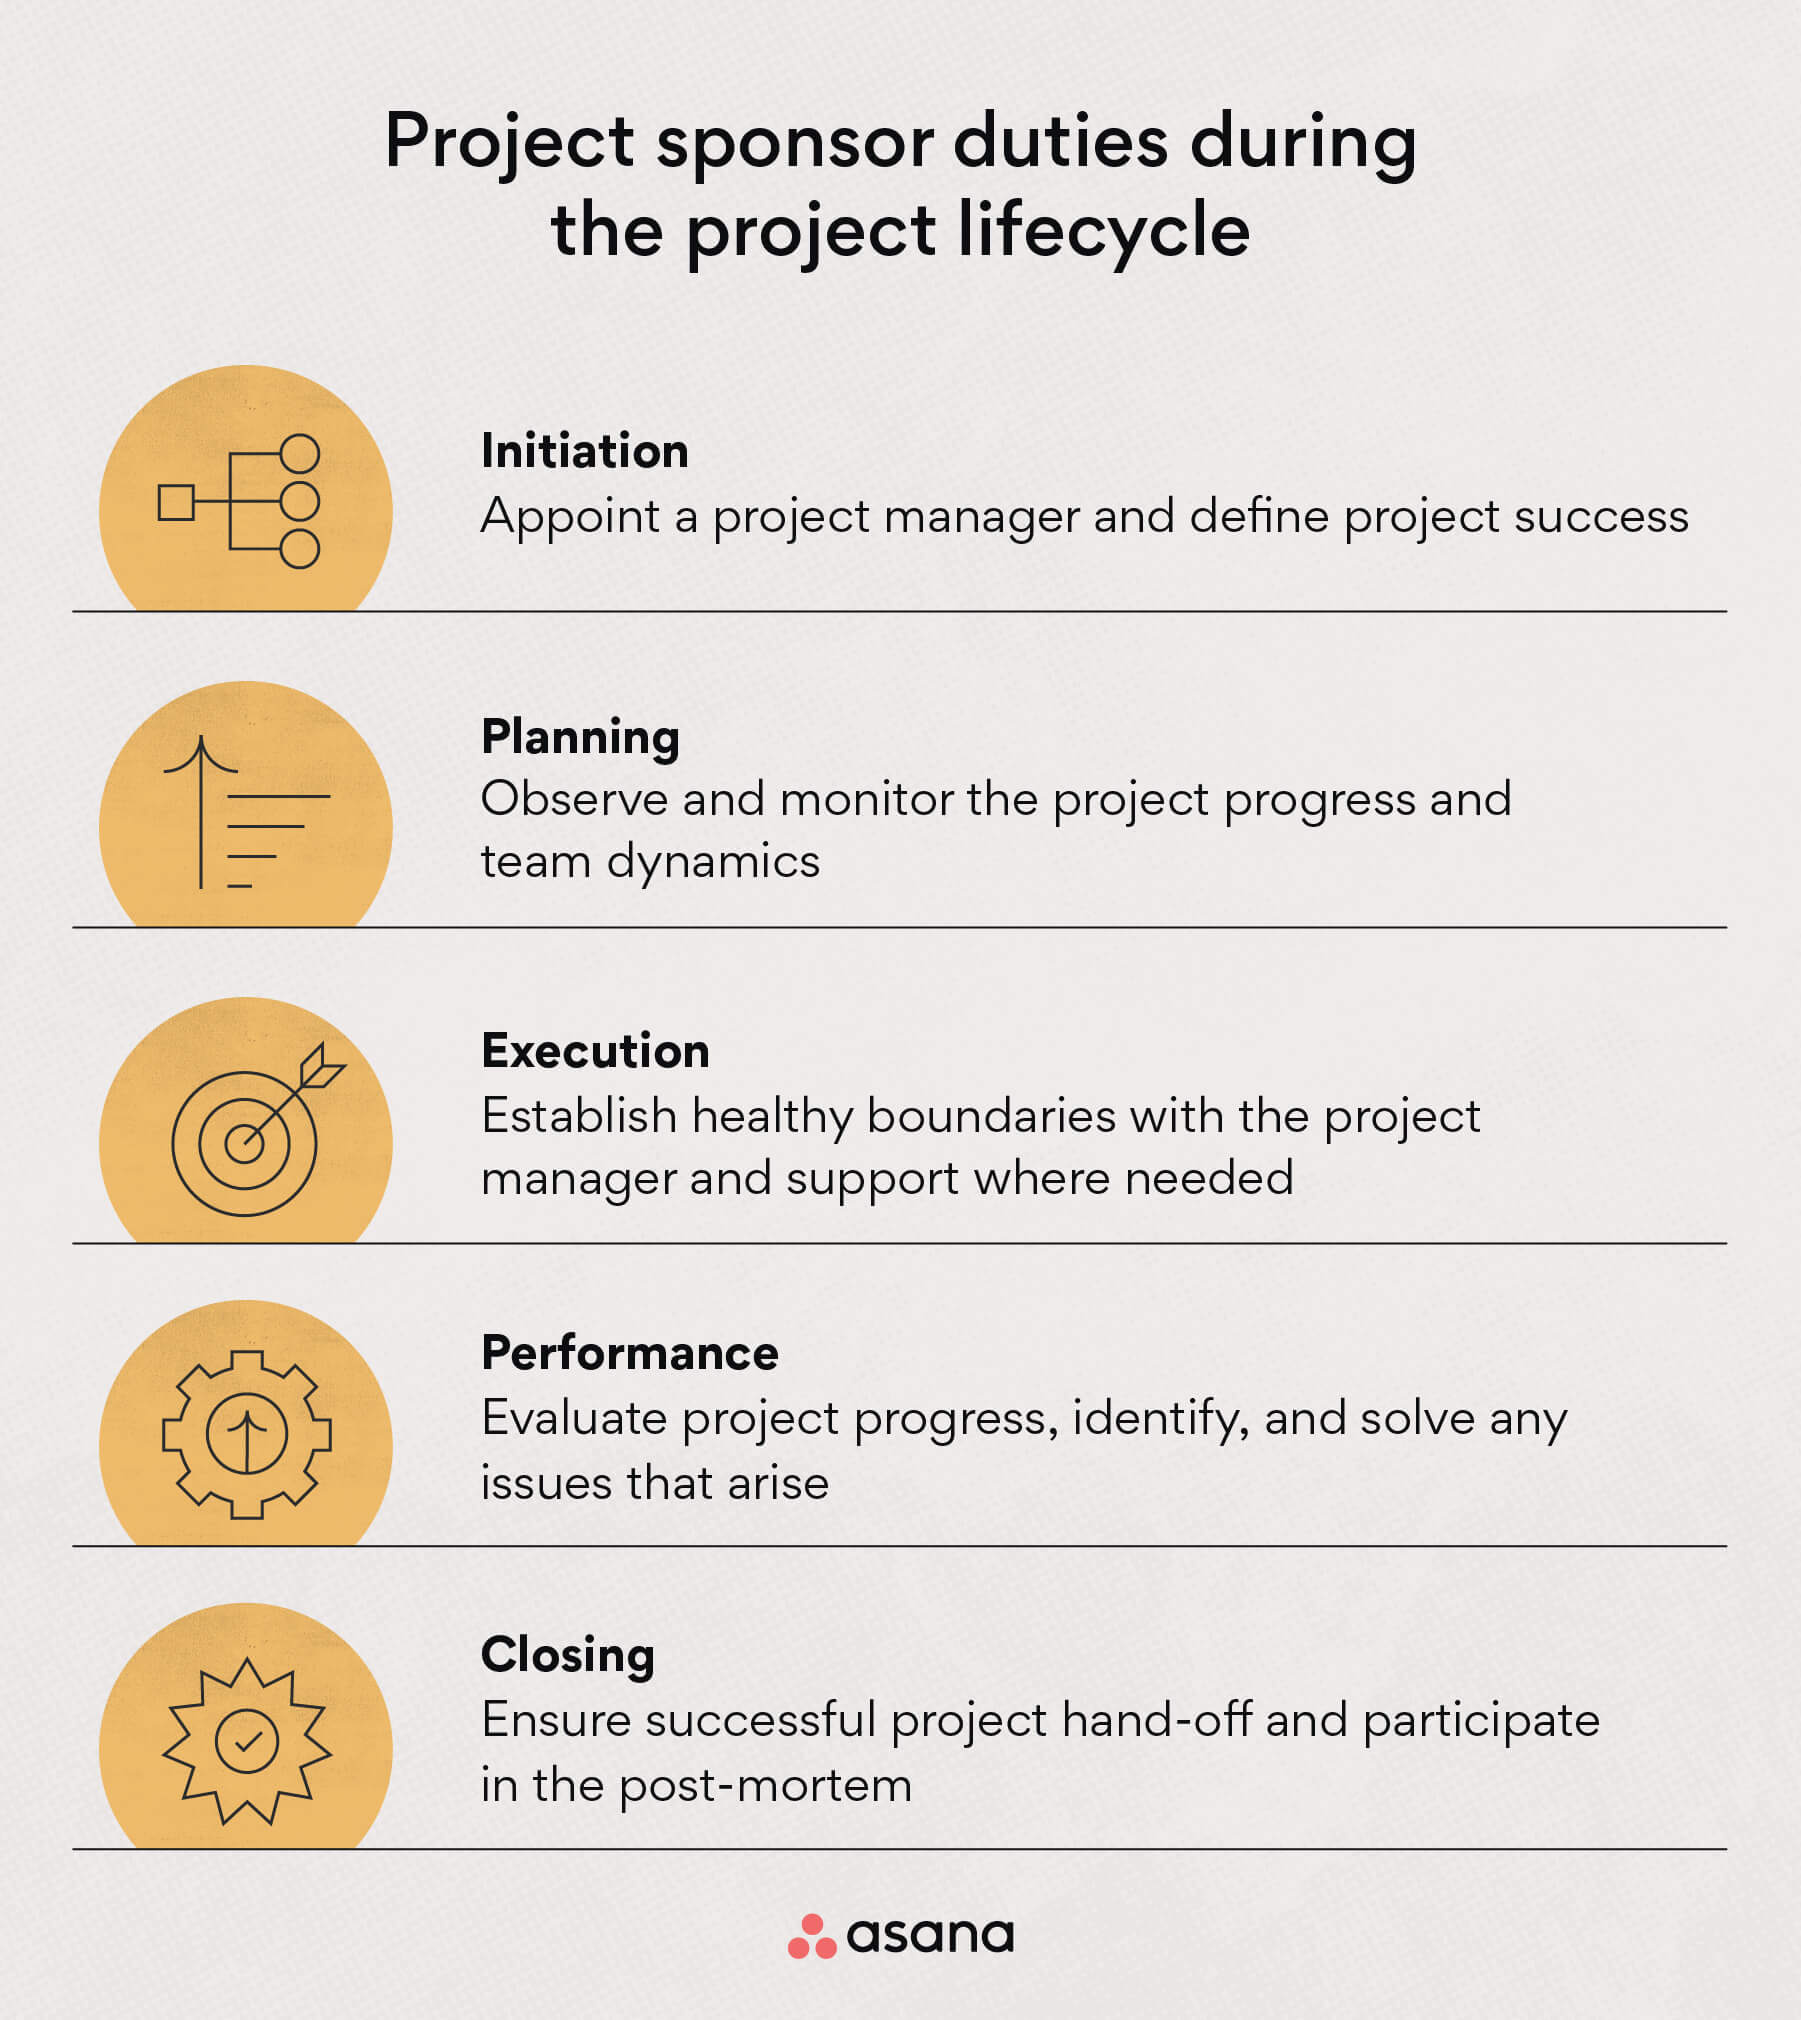 Project sponsor duties throughout the project lifecycle